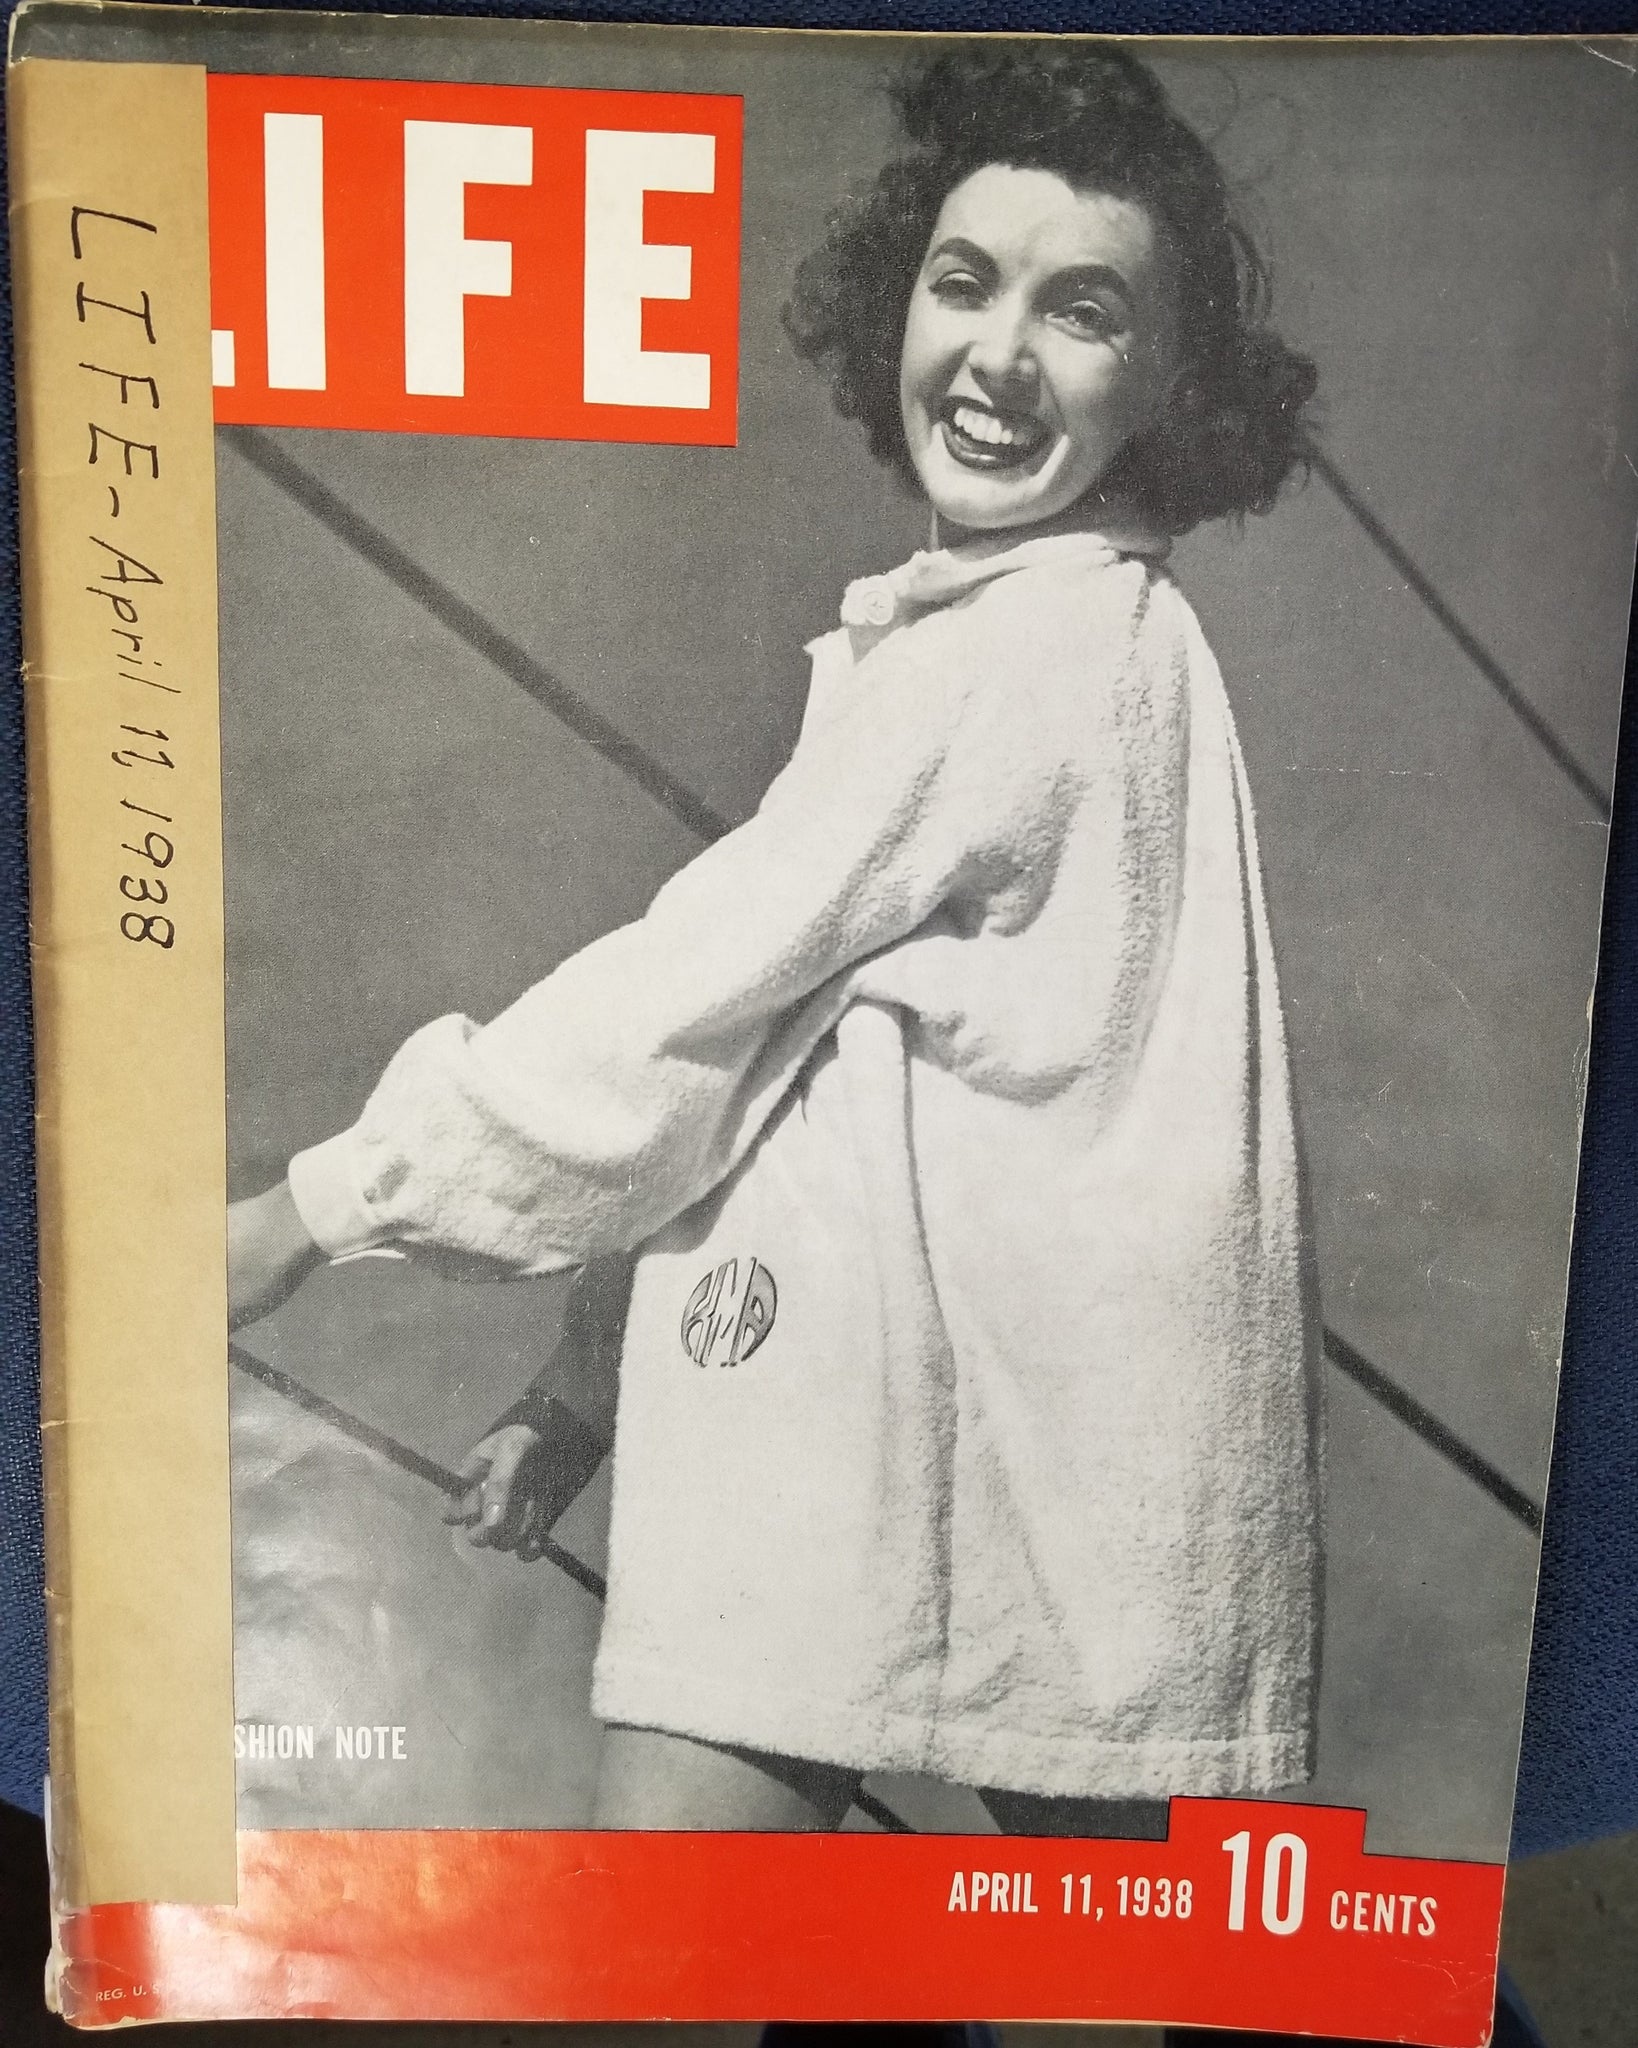 LIFE MAGAZINE APRIL 11, 1938  by Luce, Henry R. (Editor)